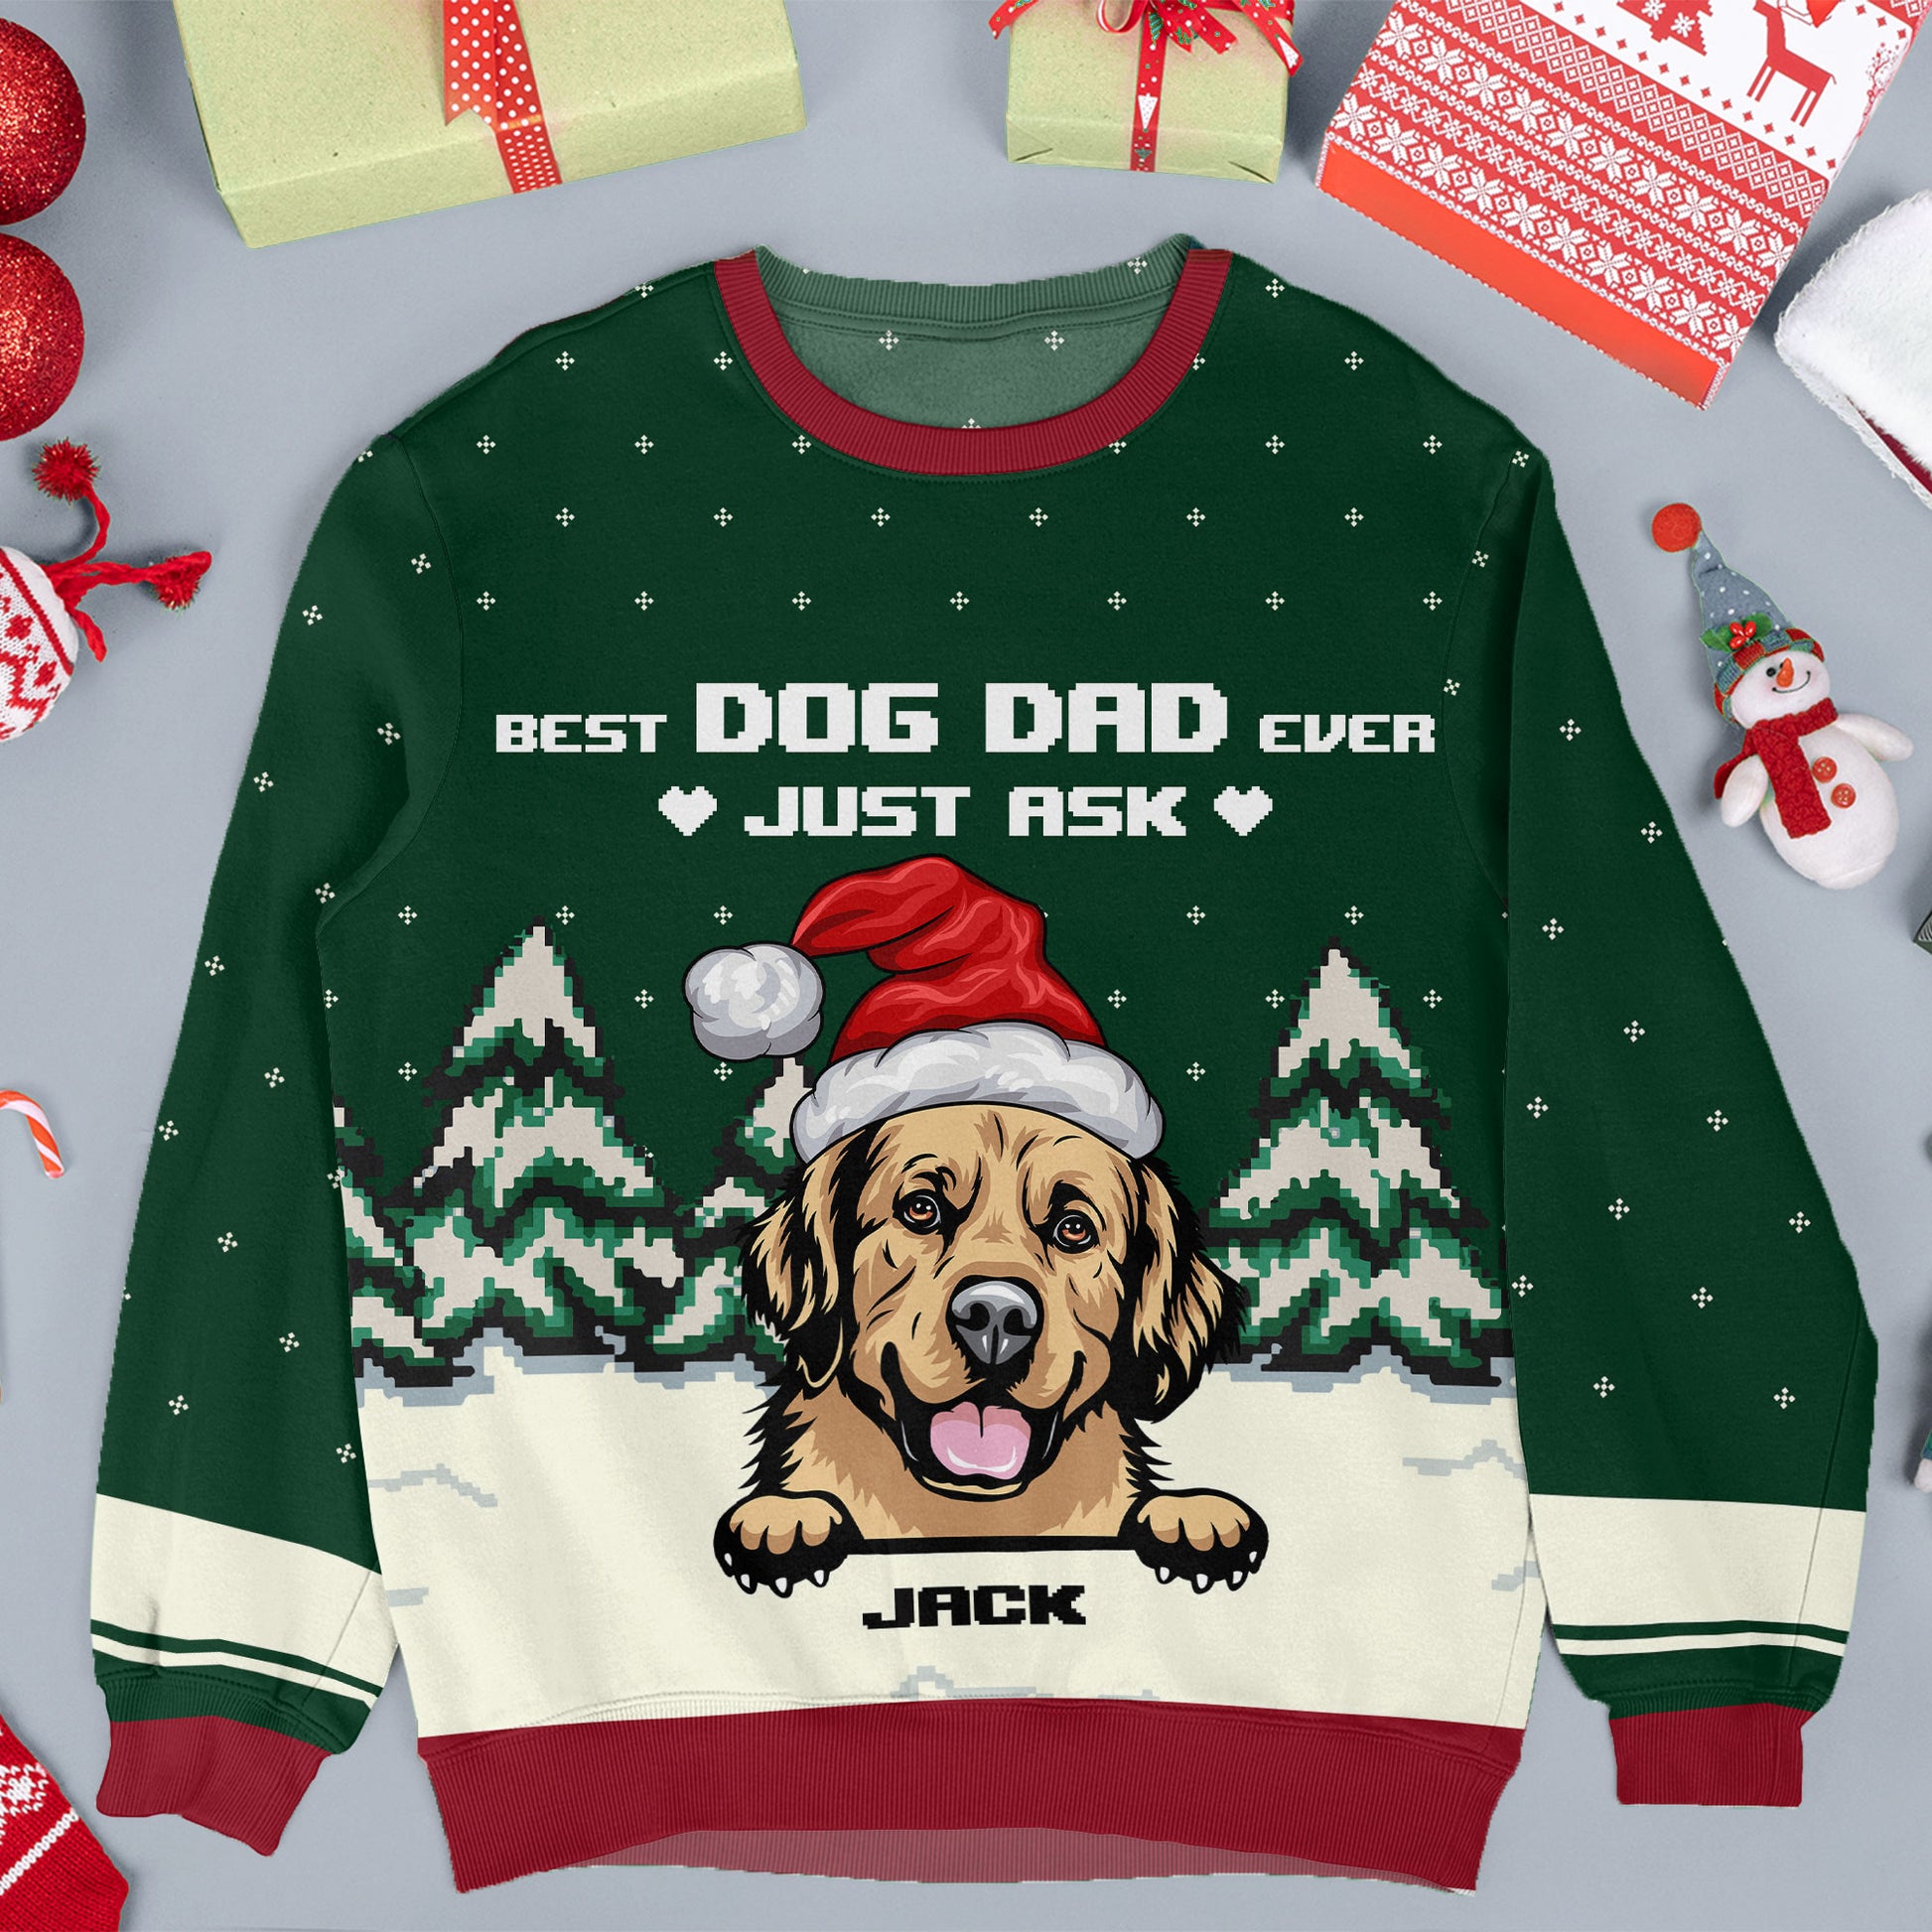 Best Dog Dad Ever Just Ask - Personalized Ugly Sweater